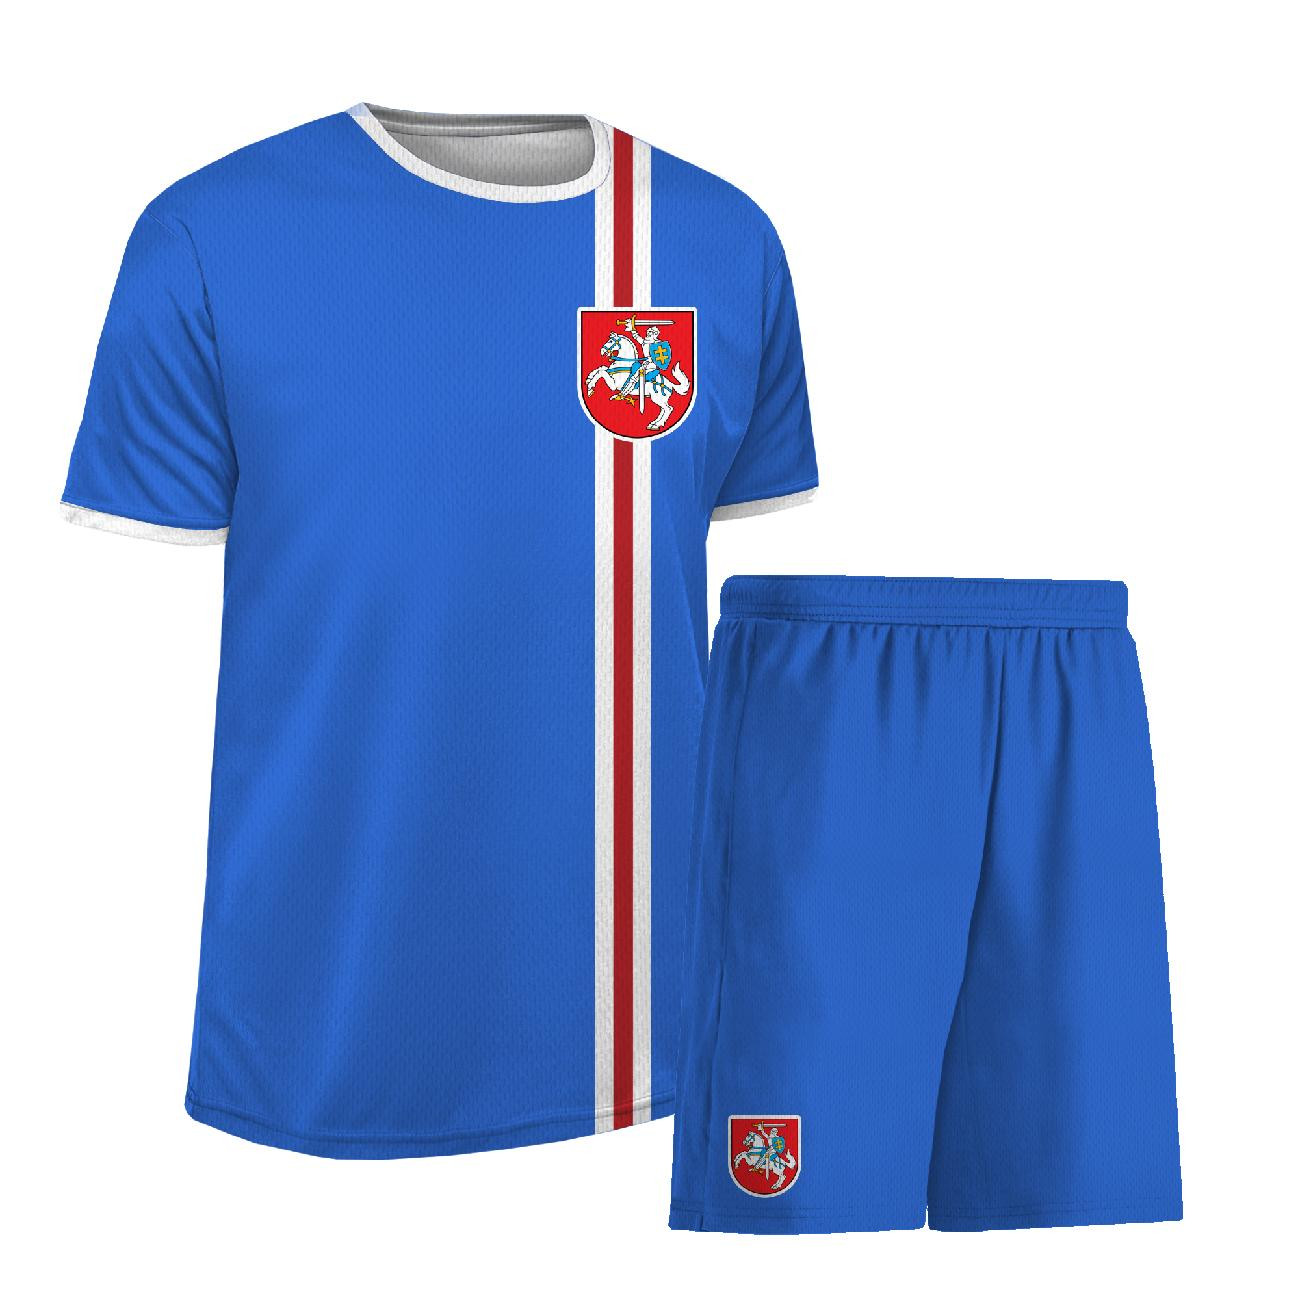 Children's sport outfit "PELE" - LITHUANIA - sewing set